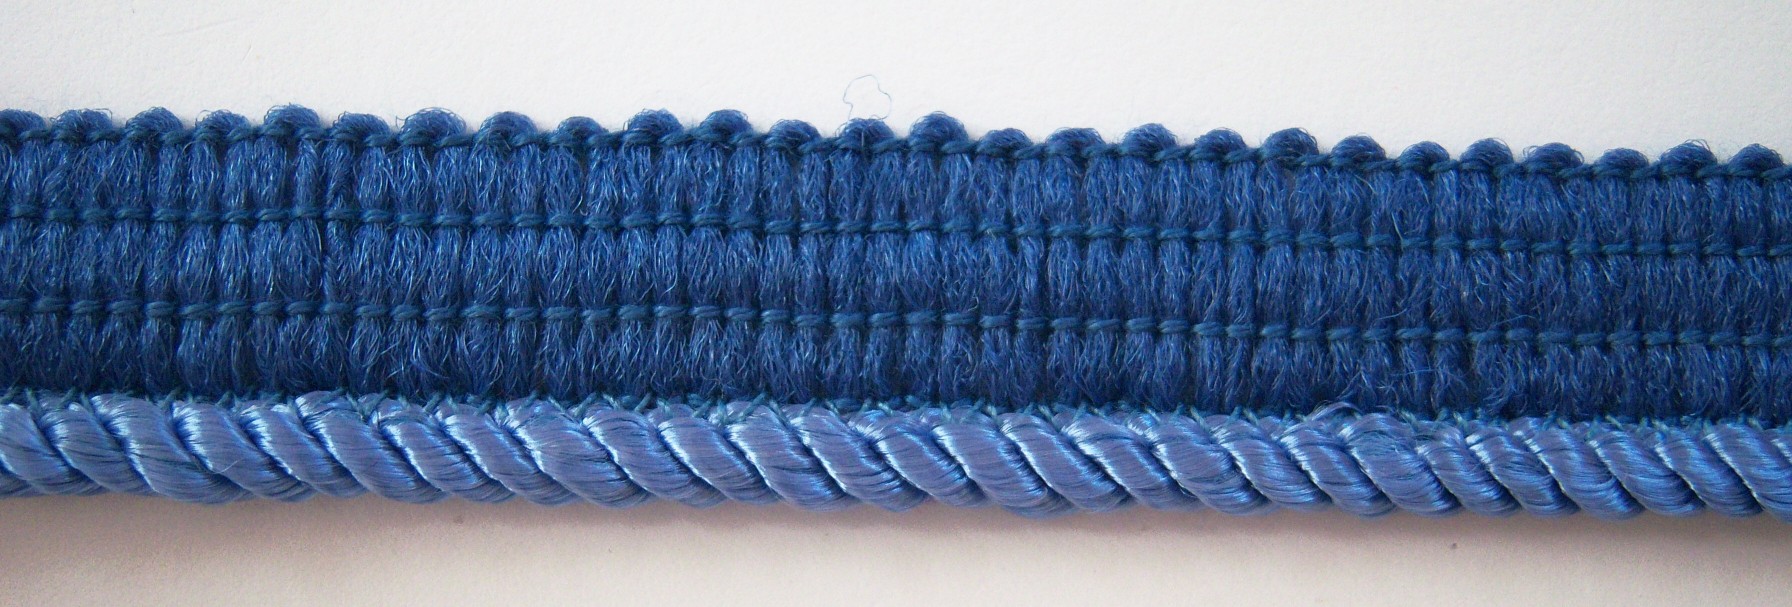 Wrights Blue  3/4" Piping